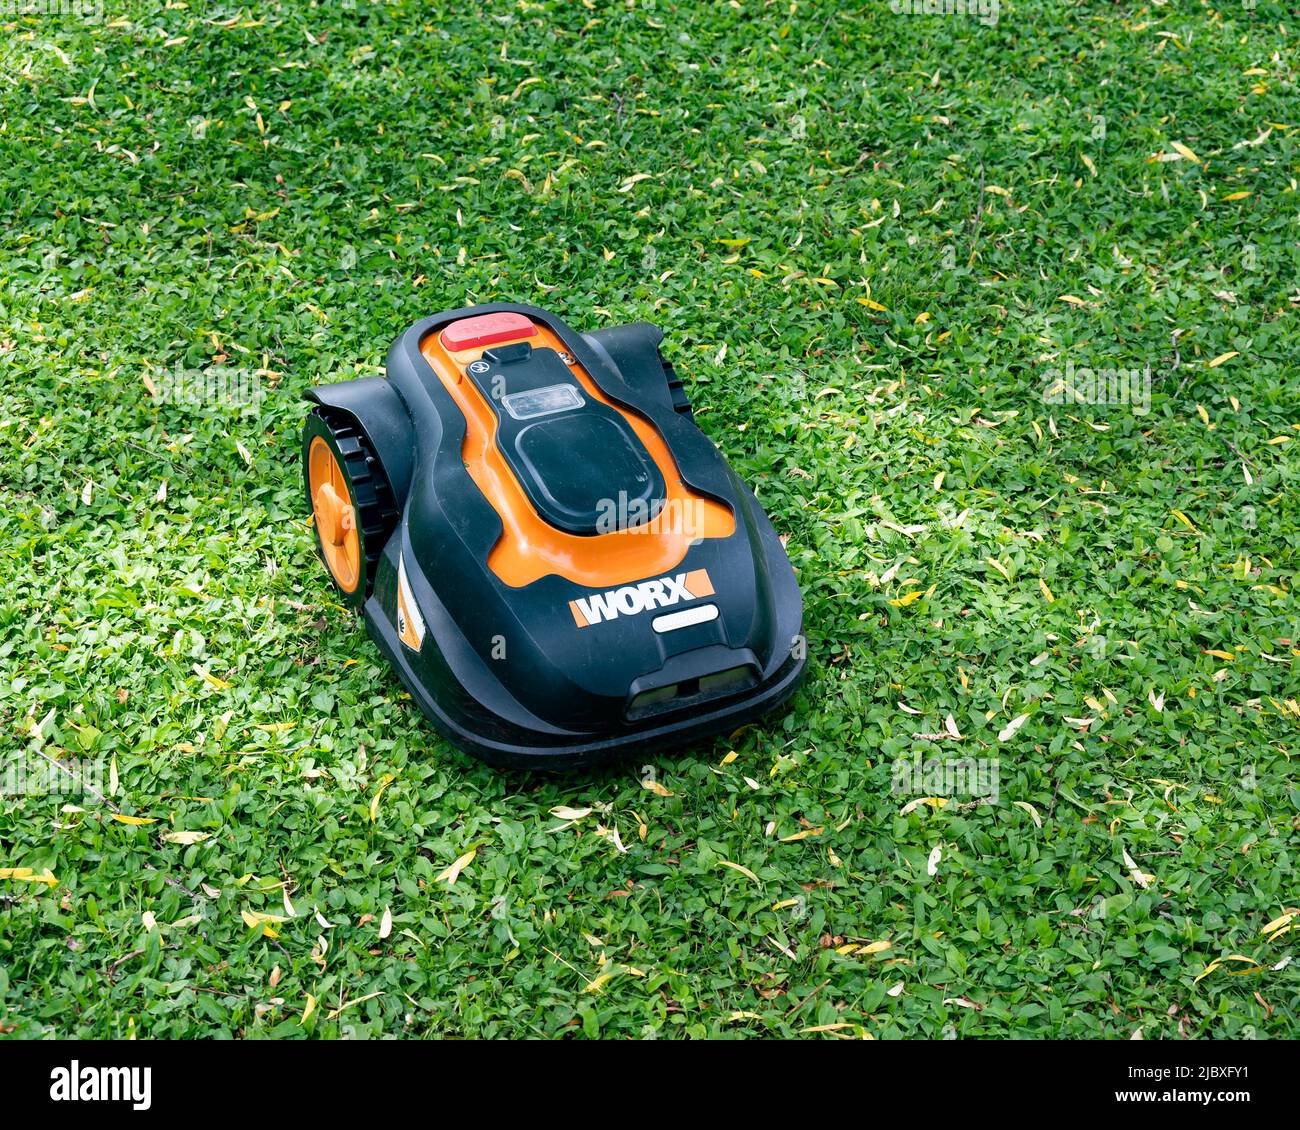 A Worx robotic lawn mower mowing a lawn Stock Photo